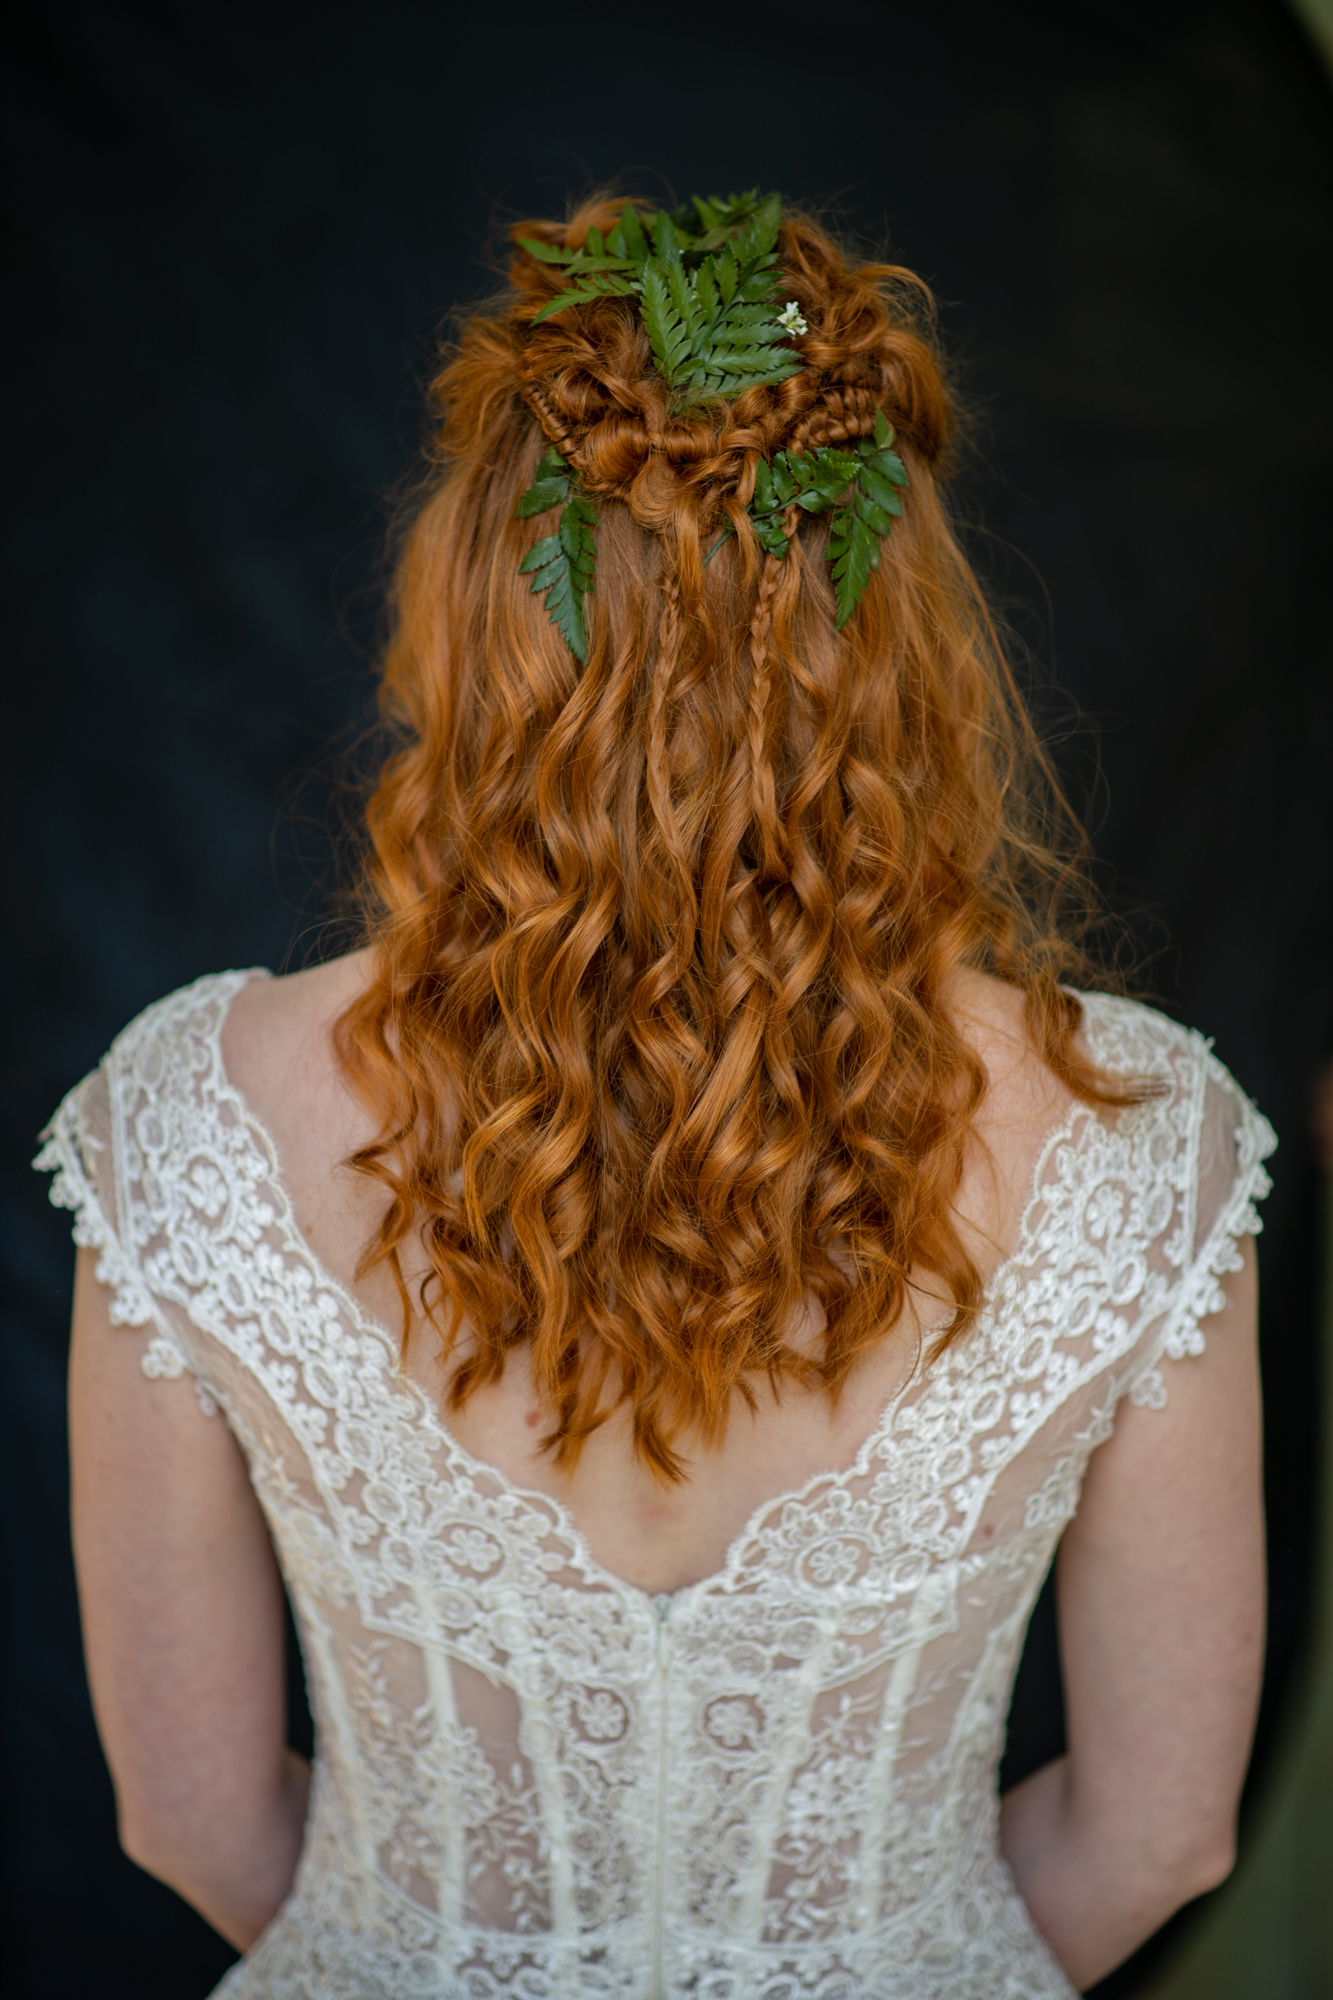 38 A Pre Raphaelite inspired love story pushing the boundaries of bridal style